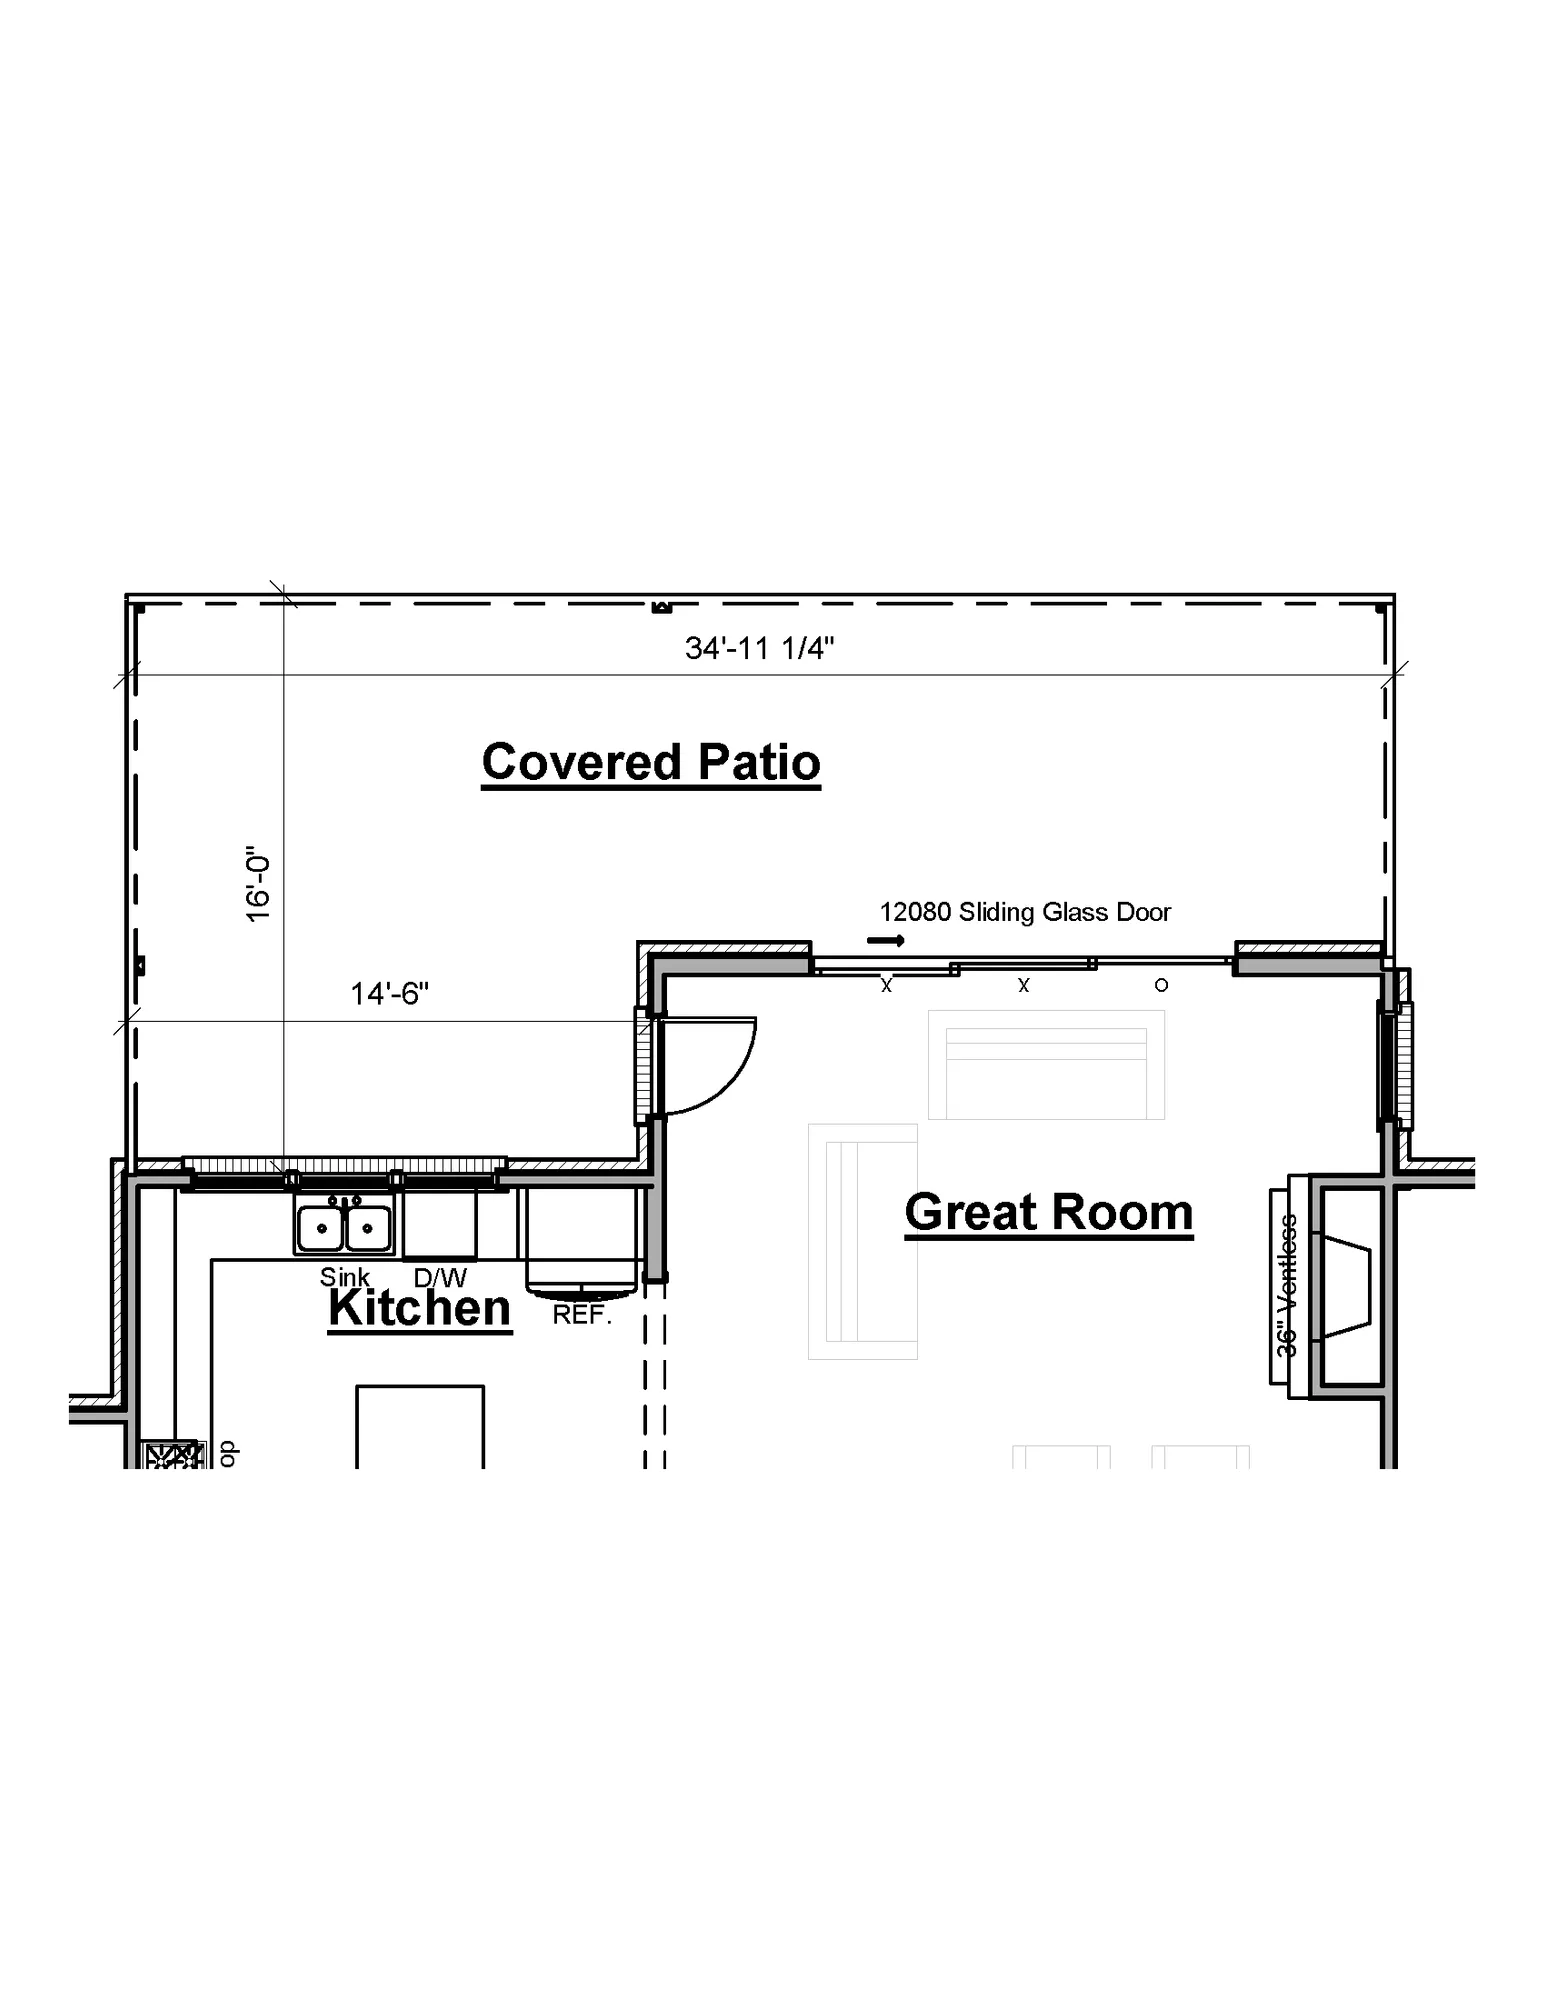 Extended Covered Patio with 12ft Sliding Glass Doors - undefined